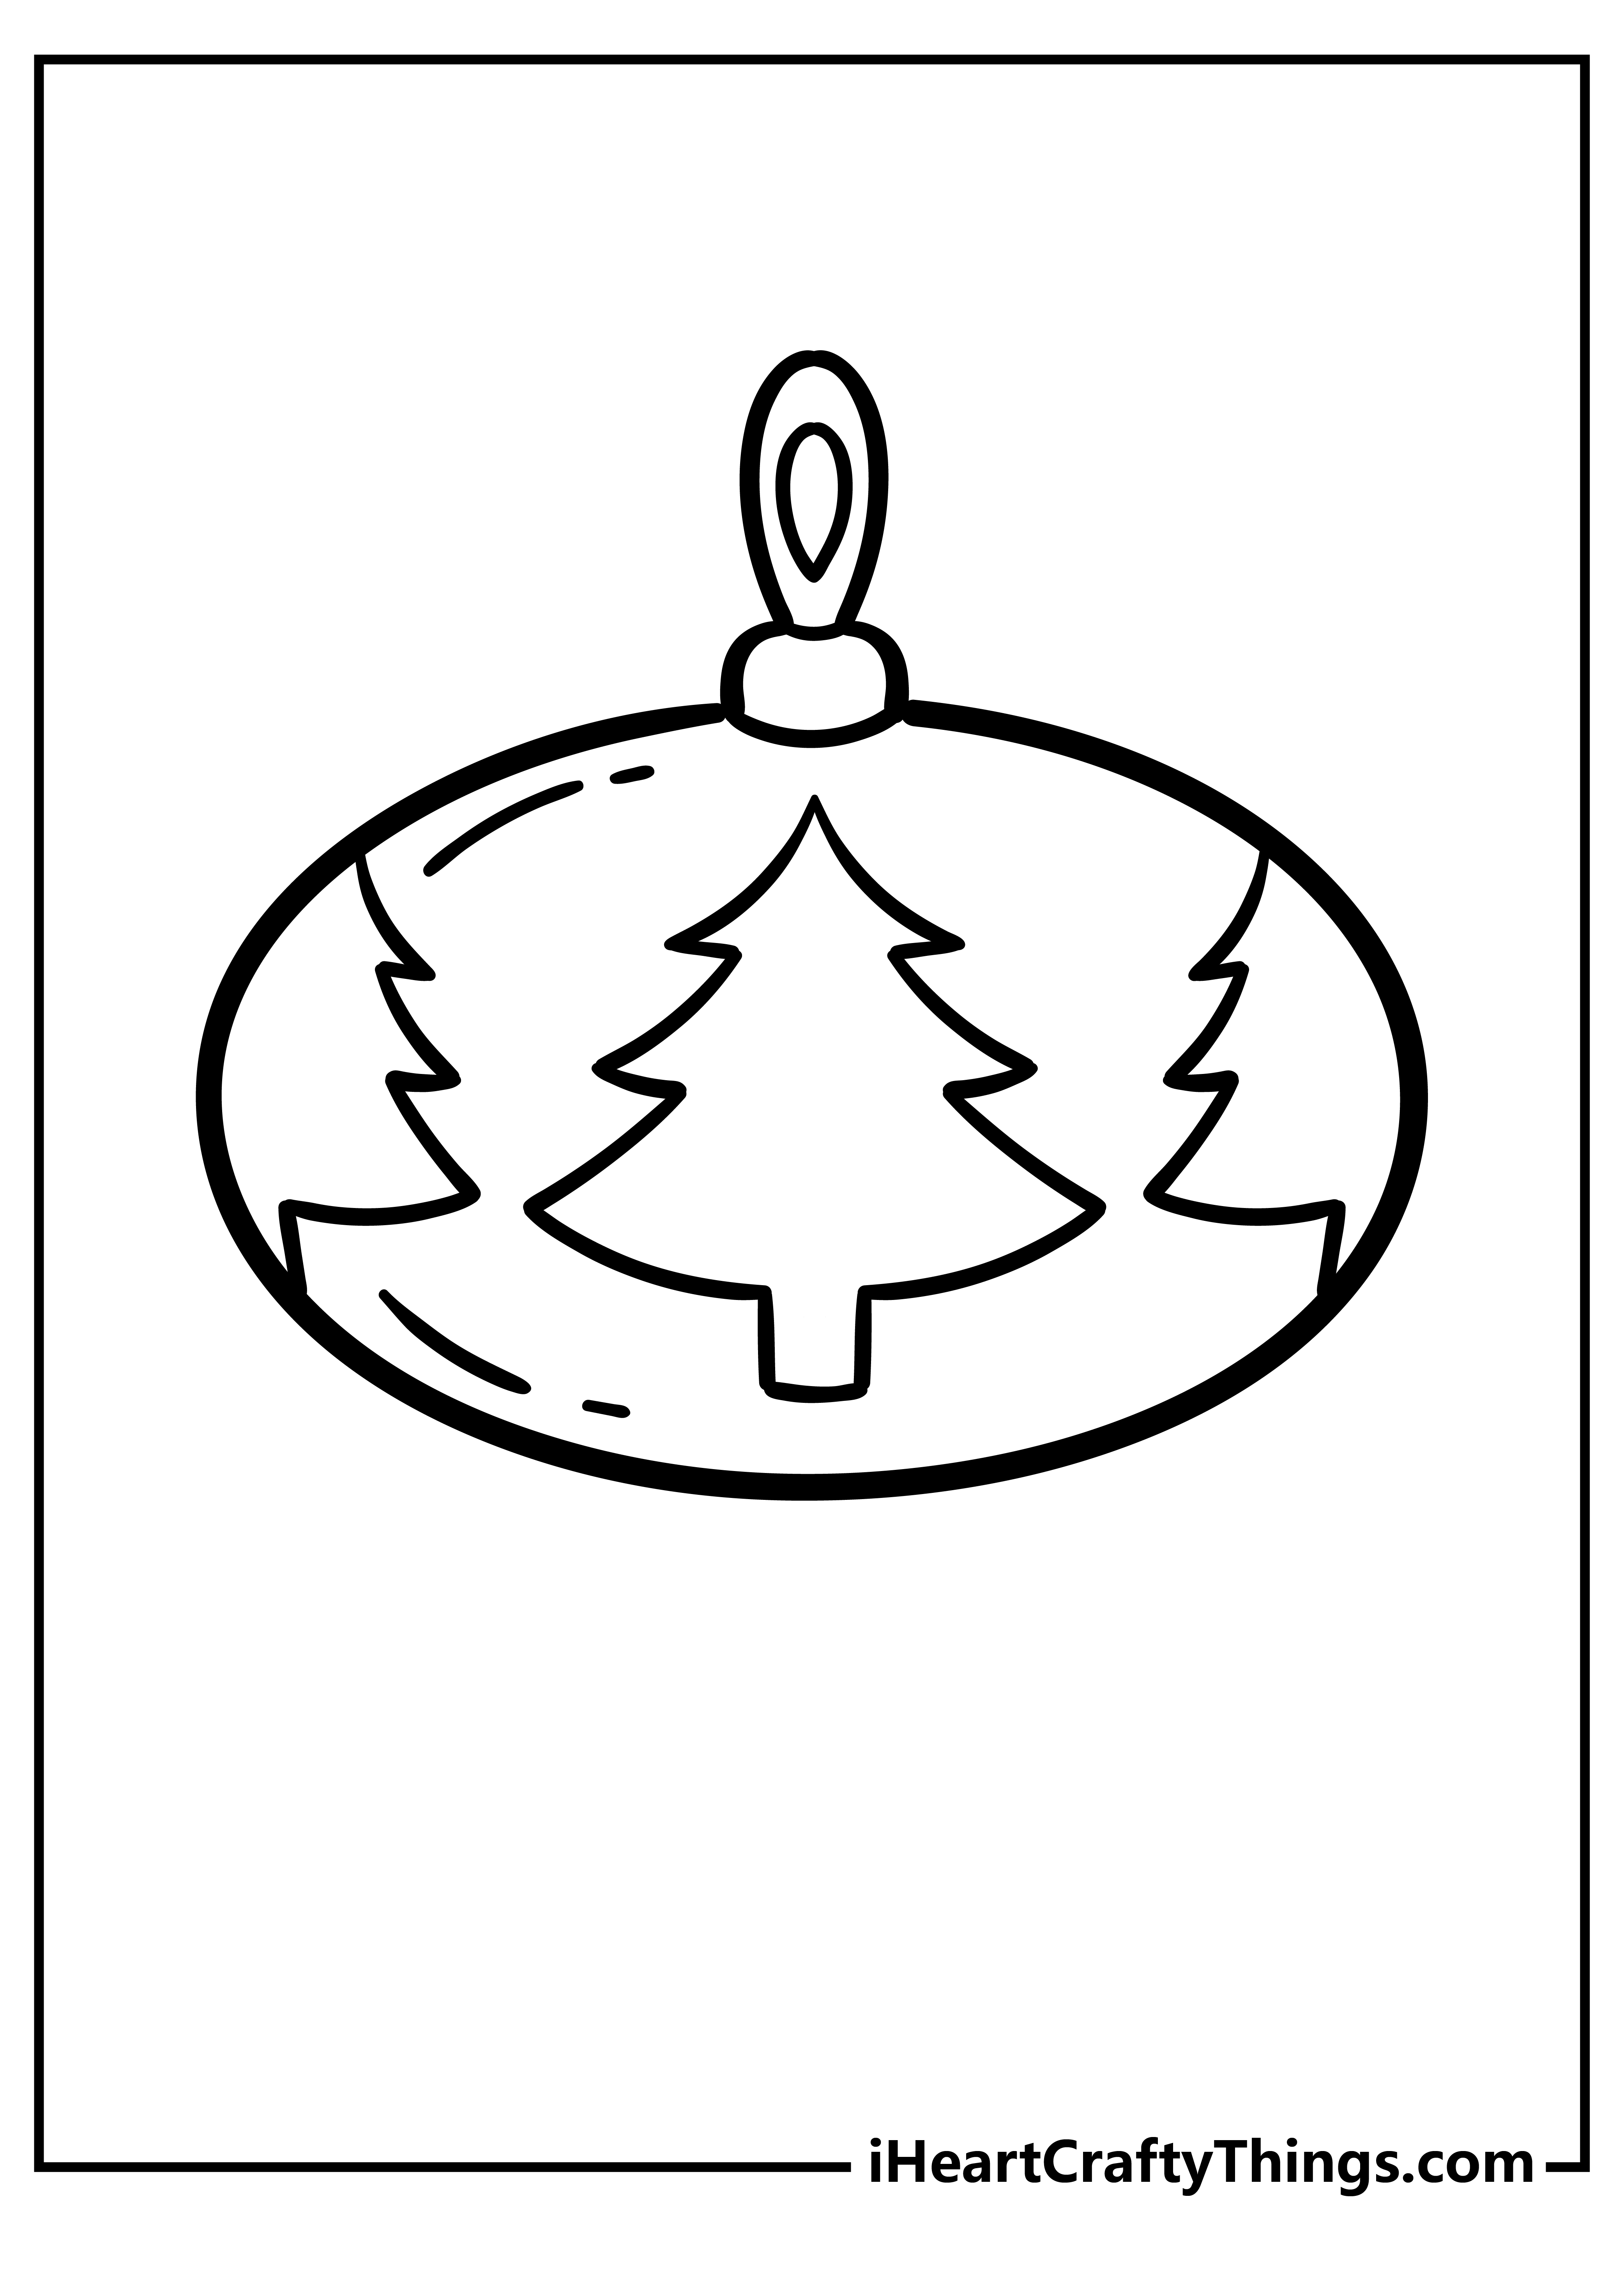 Christmas Ornament Coloring Sheet for children free download